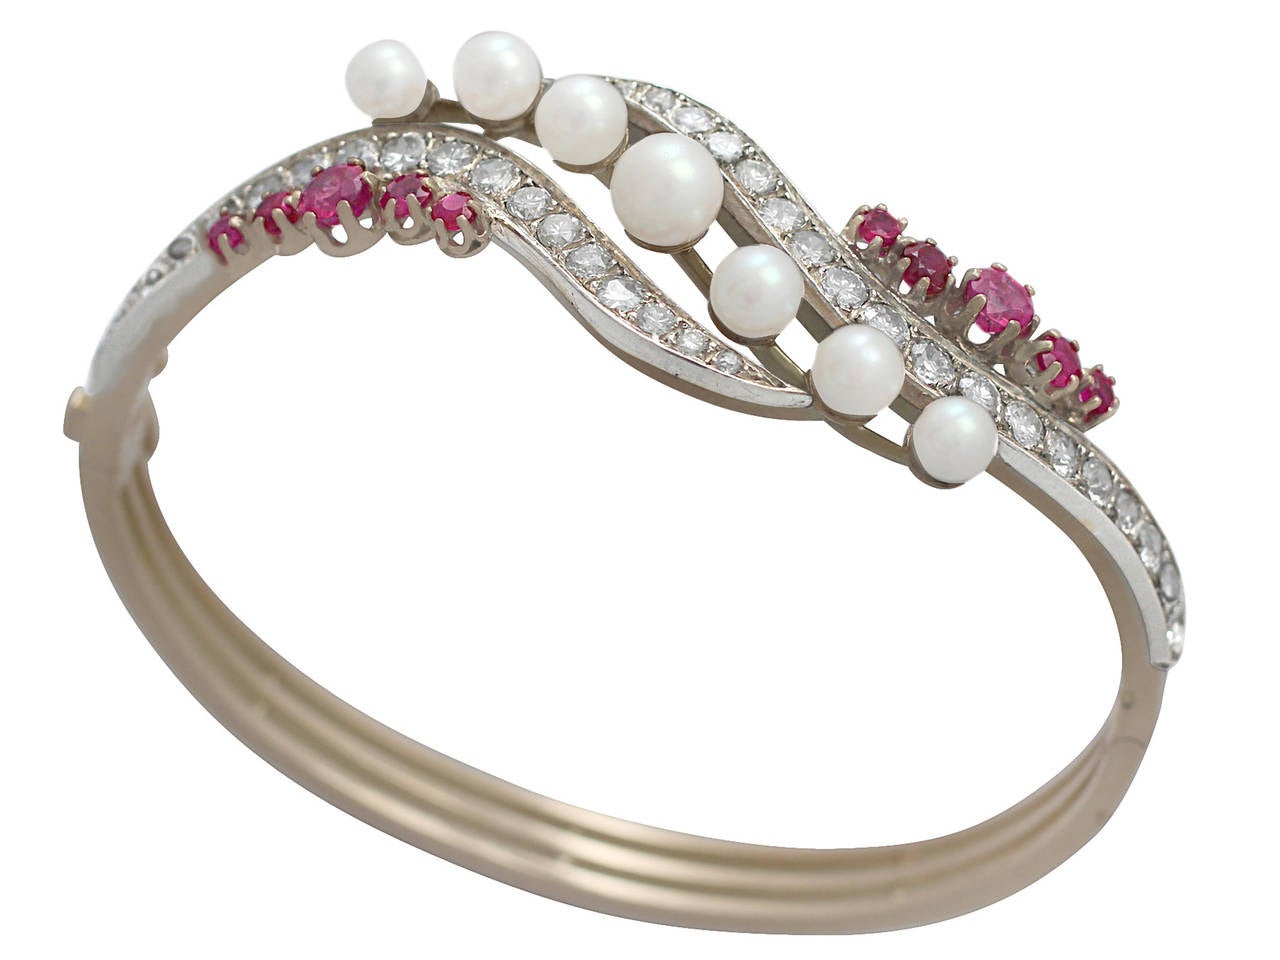 A stunning, fine and impressive pearl, ruby and diamond bangle in 18 karat yellow gold; part of our antique jewelry and estate jewelry collections

This stunning antique bangle has been crafted in 18k yellow gold.

The anterior portion of this